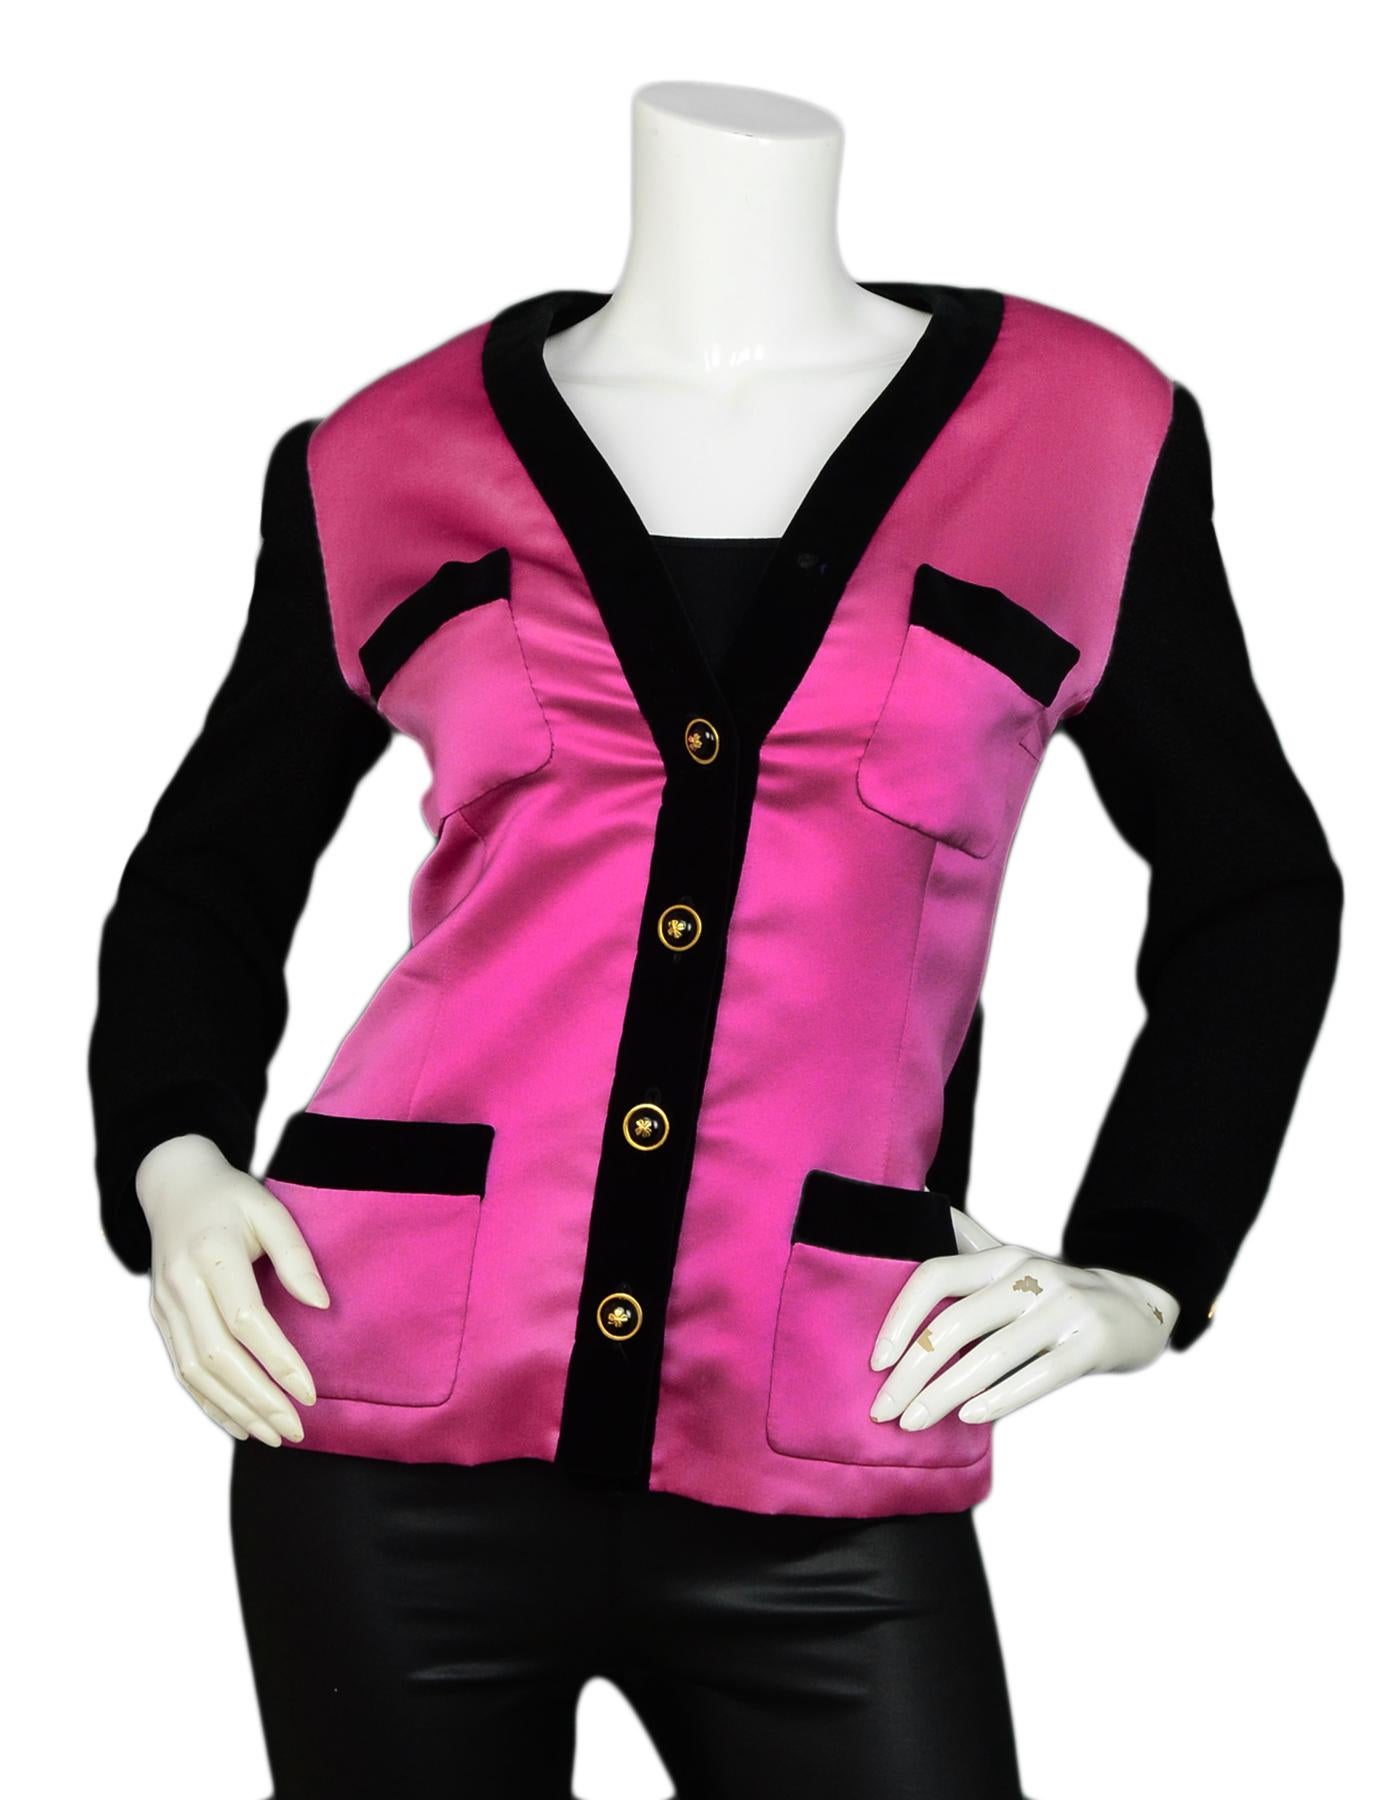 Chanel Pink Silk with Black Velvet Trim Jacket sz 40

Made In: France
Color: Pink, Black
Materials: 100% Silk; 100% Cotton; 68% Wool 